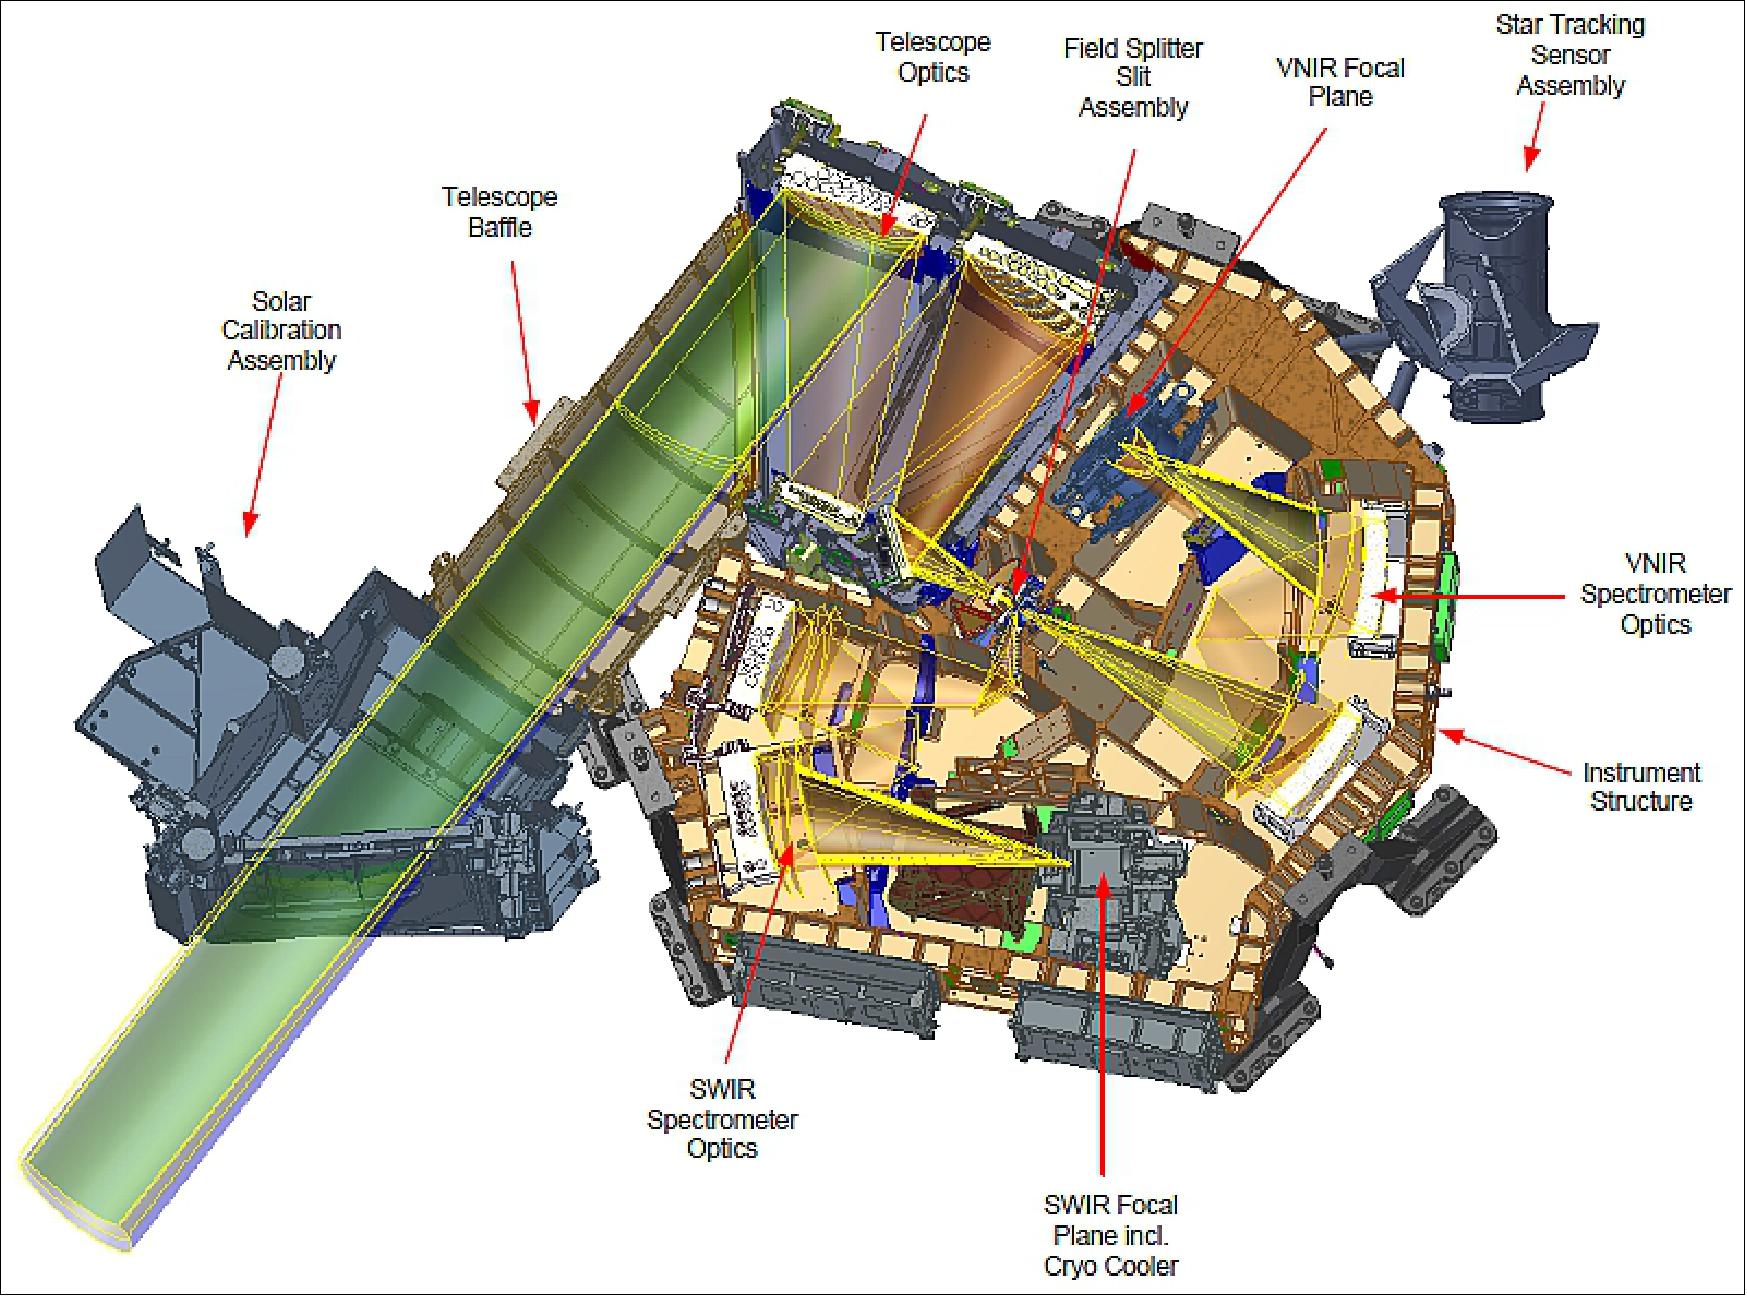 Figure 20: Schematic view of the main components of the EnMAP double-spectrometer instrument concept (image credit: EnMAP collaboration)